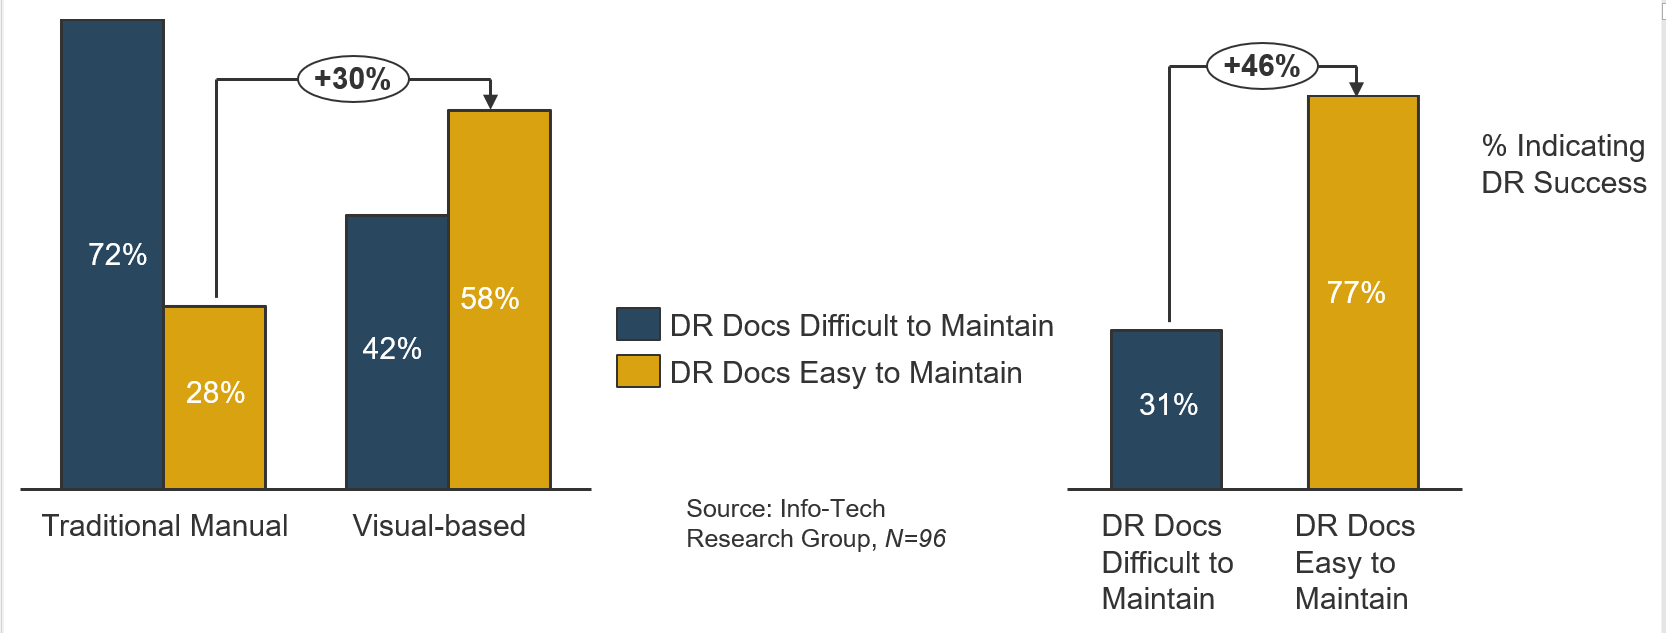 Two bar graphs documenting survey responses regarding maintenance ease of DR documentation types. The first graph compares Traditional Manual vs Visual-based. For 'Traditional Manual' 72% responded they were Difficult to maintain while 28% responded they were Easy to maintain; for 'Visual-based' 42% responded they were Difficult to maintain while 58% responded they were Easy to maintain. Visual-based DR documentation received 30% more votes for Easy to Maintain. The second graph compares success rates of 'Difficult to Maintain' vs 'Easy to Maintain' DR documentation with Difficult being 31% and Easy being 77%, a 46% difference. 'Source: Info-Tech Research Group, N=96'.